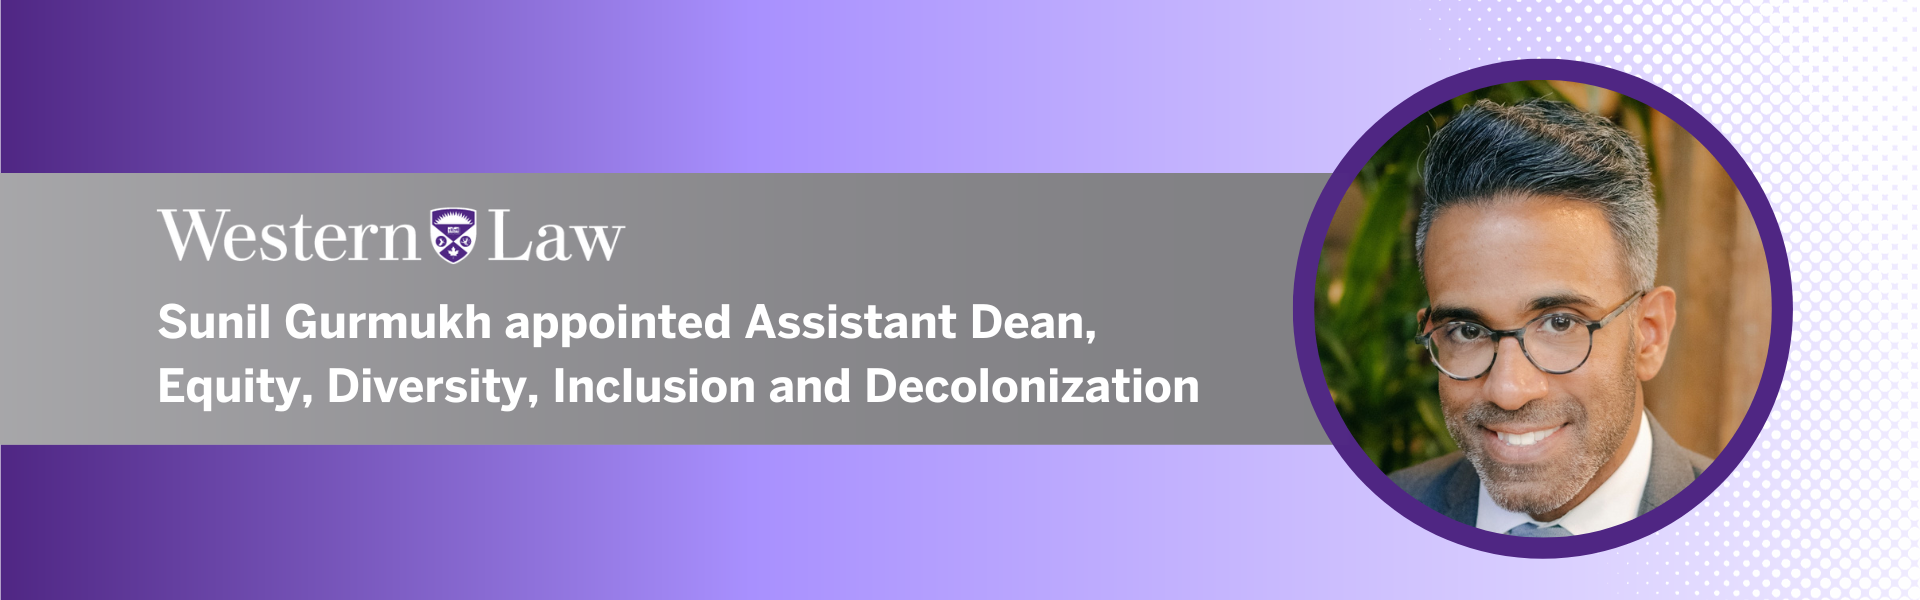 Text on photo reads Sunil Gurmukh appointed Assistant Dean, Equity, Diversity, Inclusion and Decolonization along with a headshot of Sunil Gurmukh on a gradient purple background